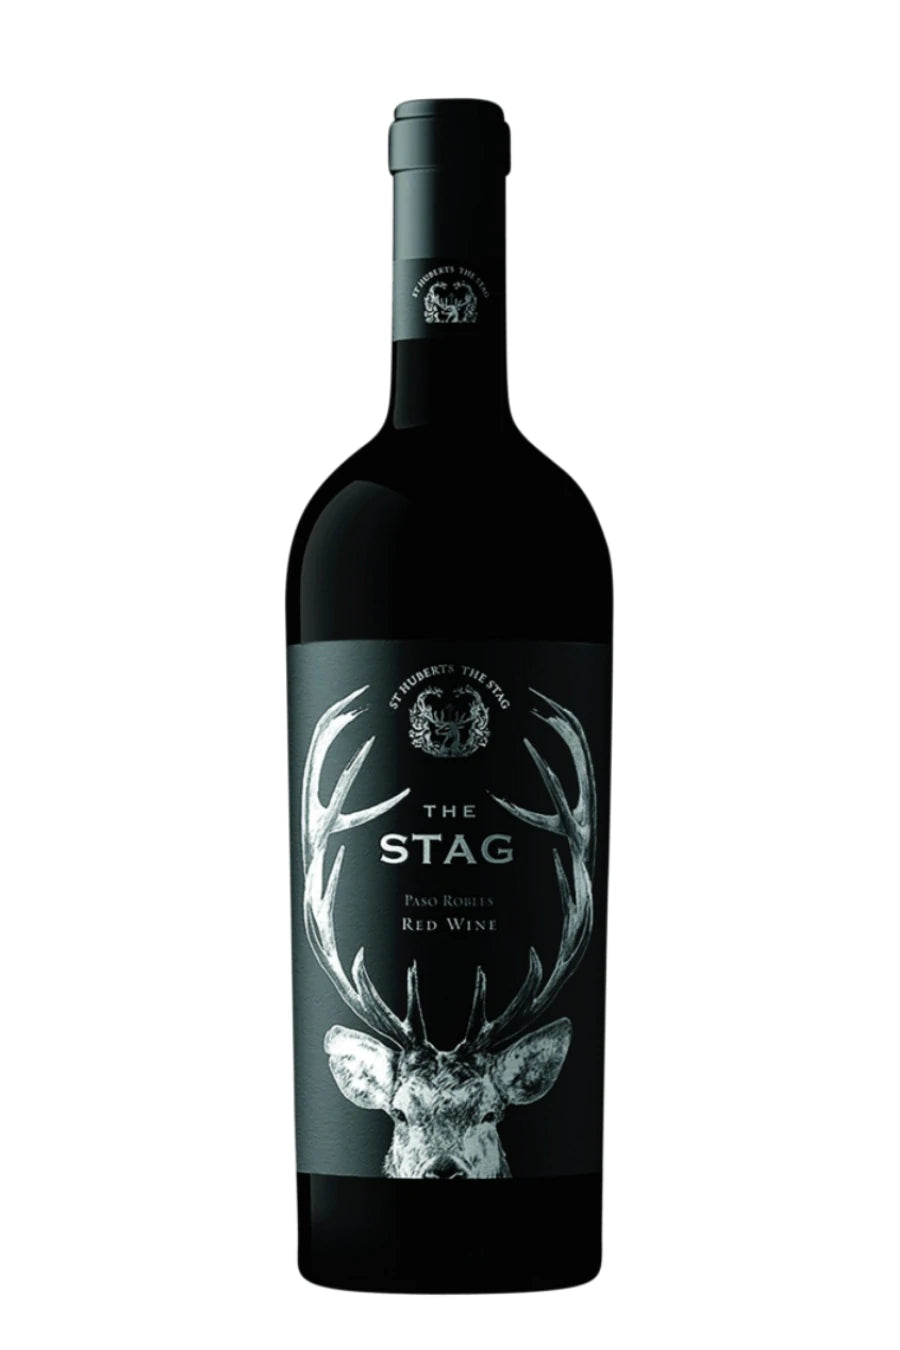 St Huberts, The Stag Red Wine Paso Robles 2019